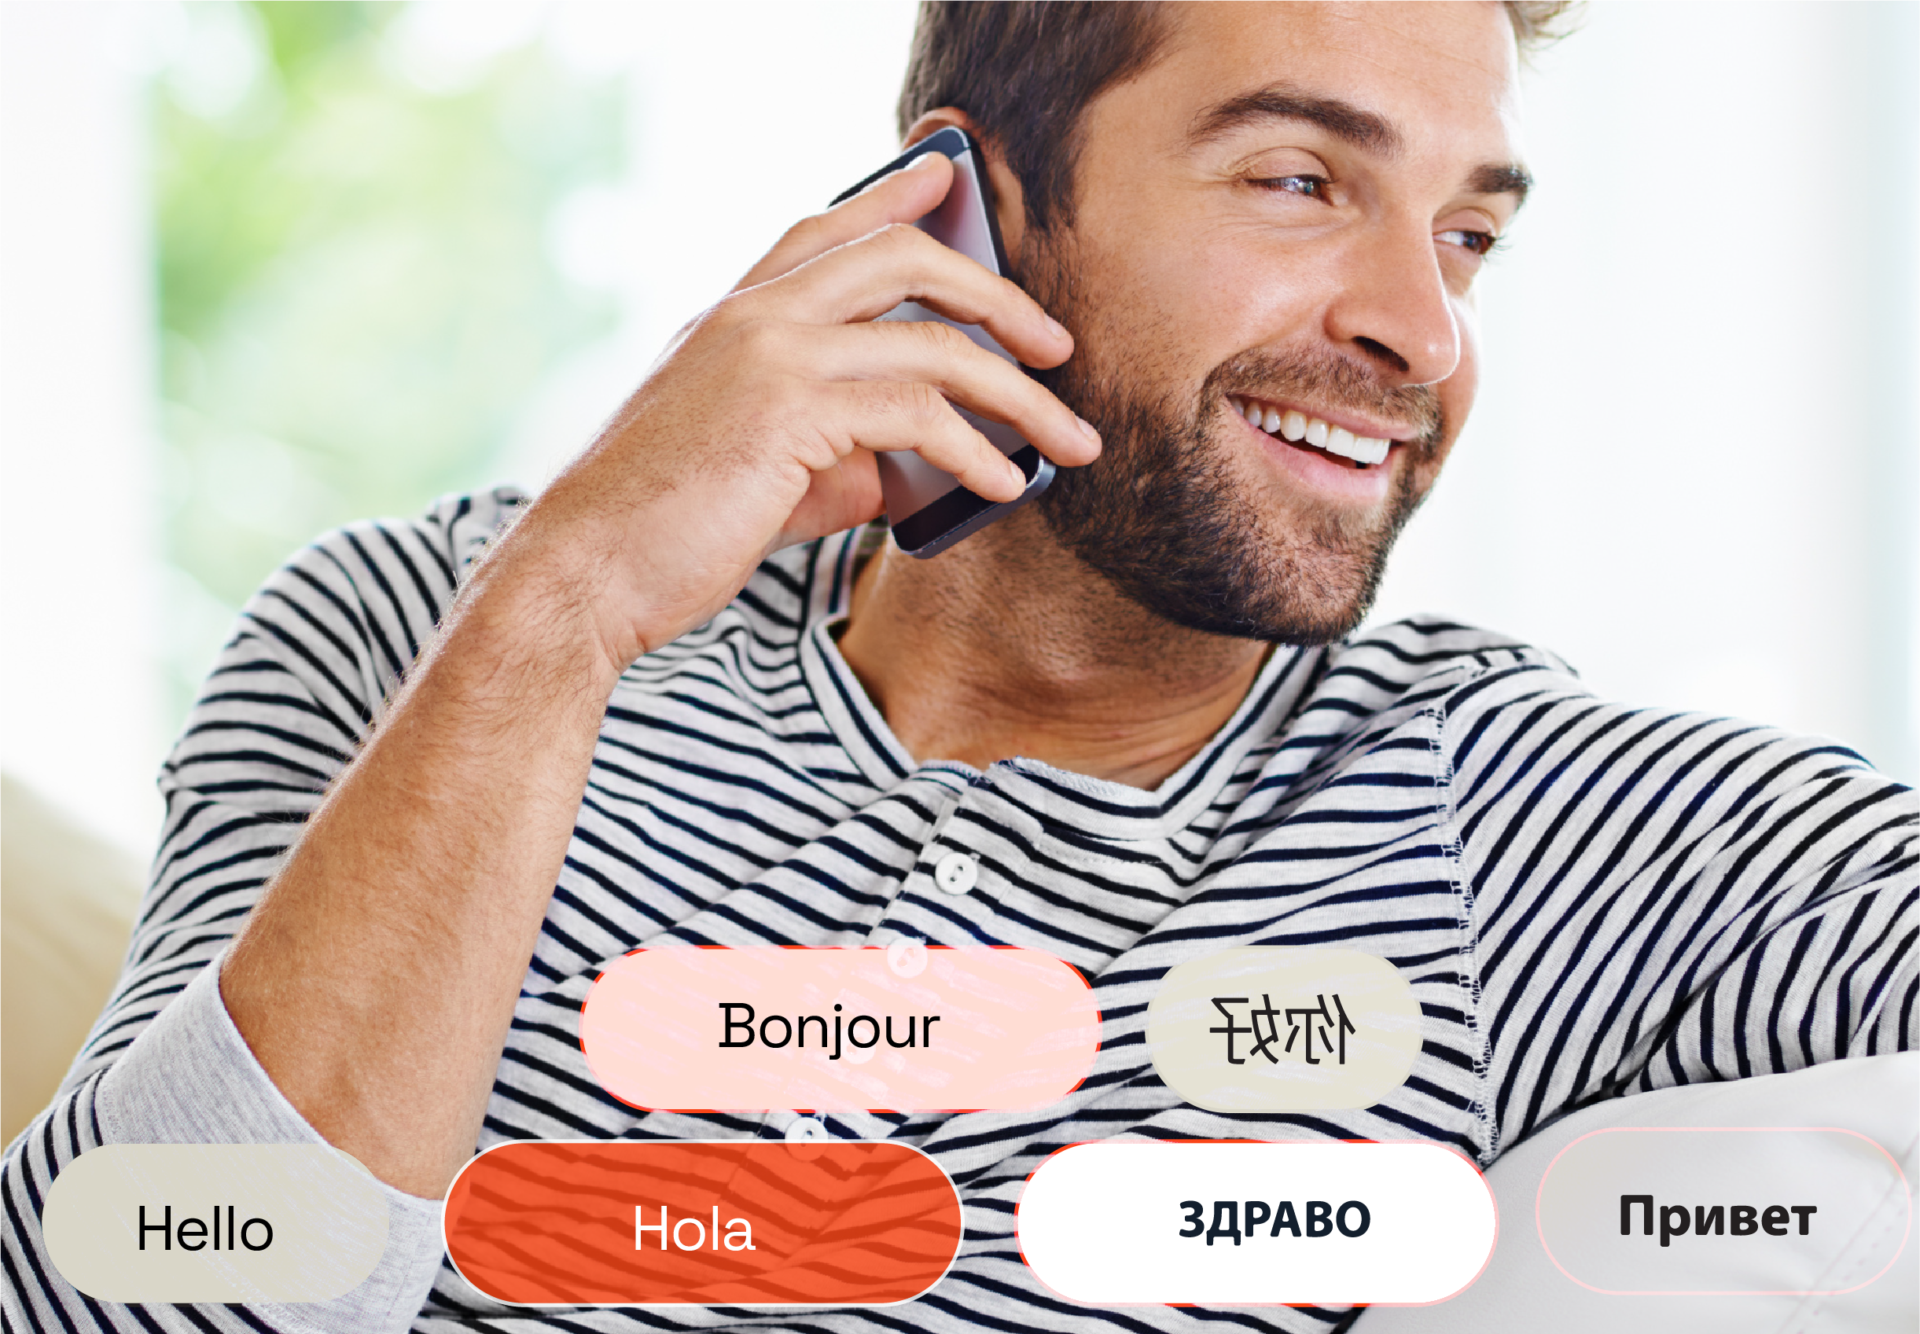 Scotty AI offers real-time spoken communication in over 100 languages.